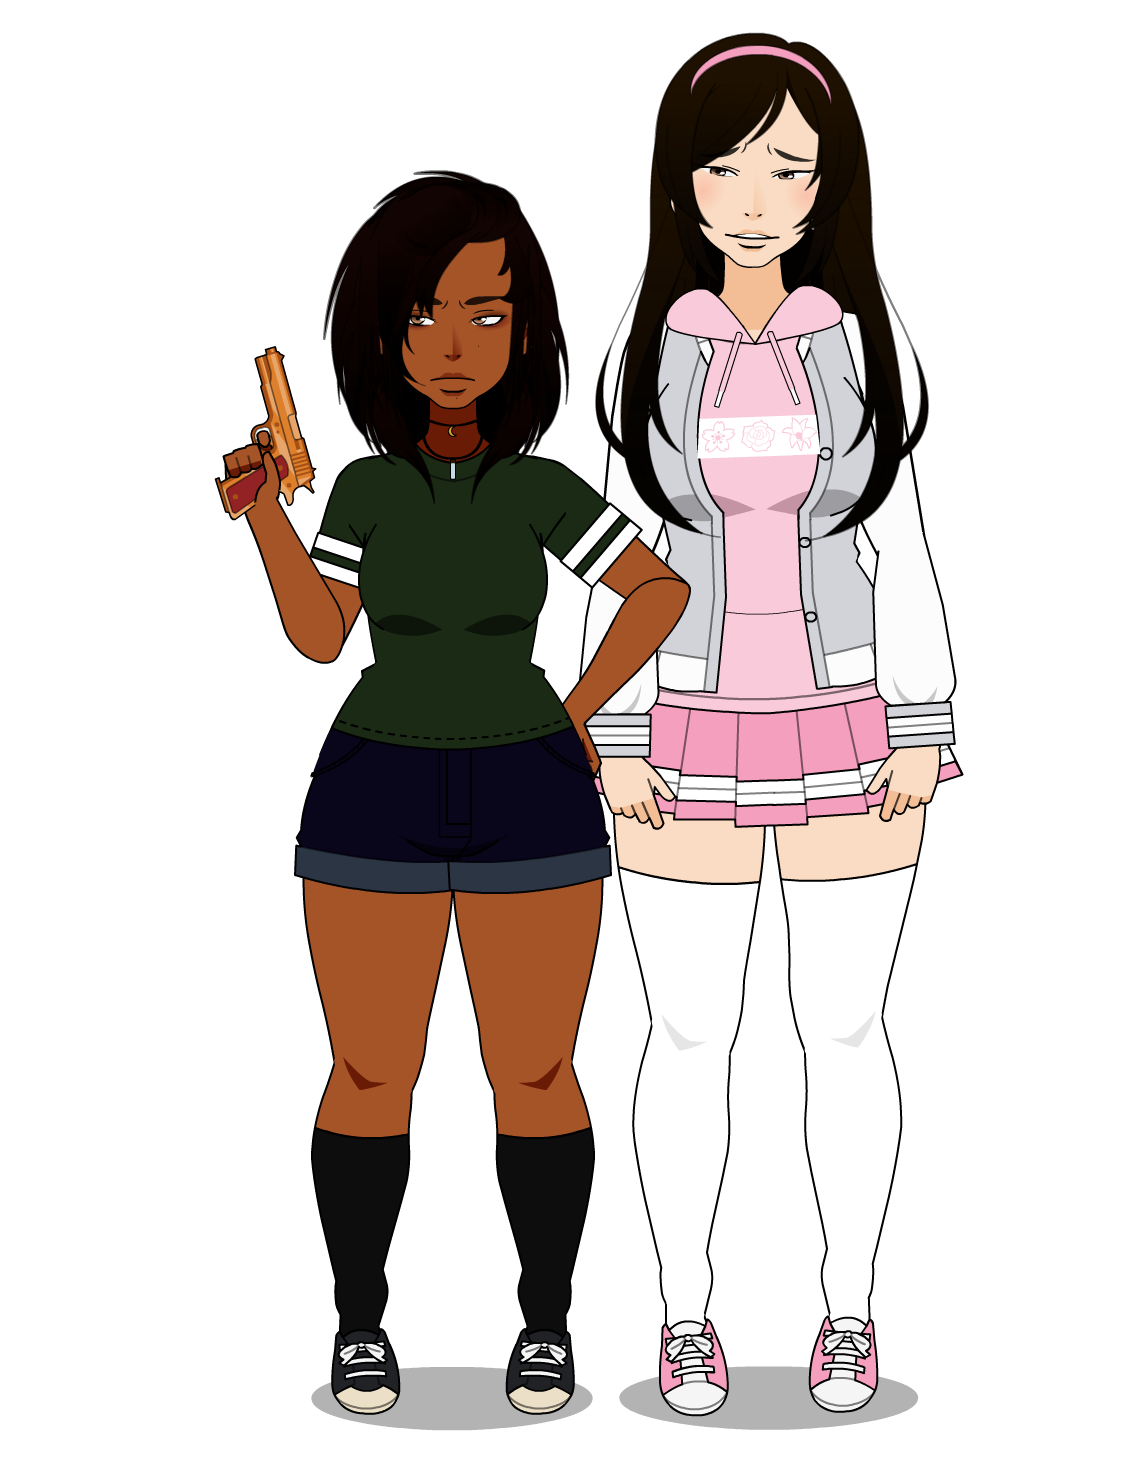 Held at nerf point||she's taller than you think by FkaTaylor on DeviantArt